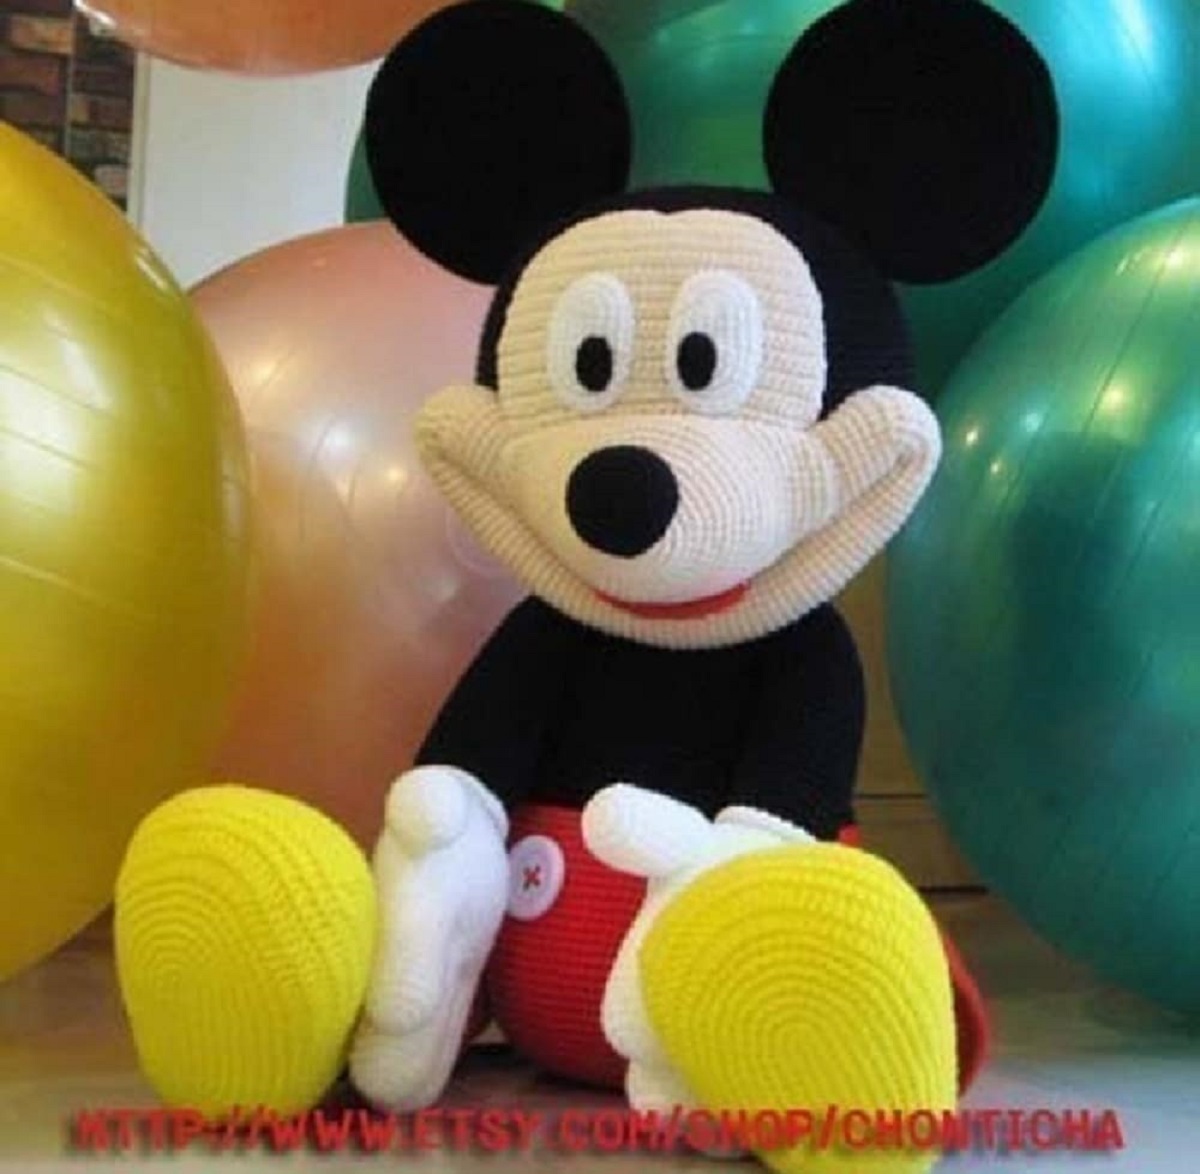 Stuffed crochet Mickey Mouse toy with a large smile and Mickey’s traditional outfit sitting next to balloons. 